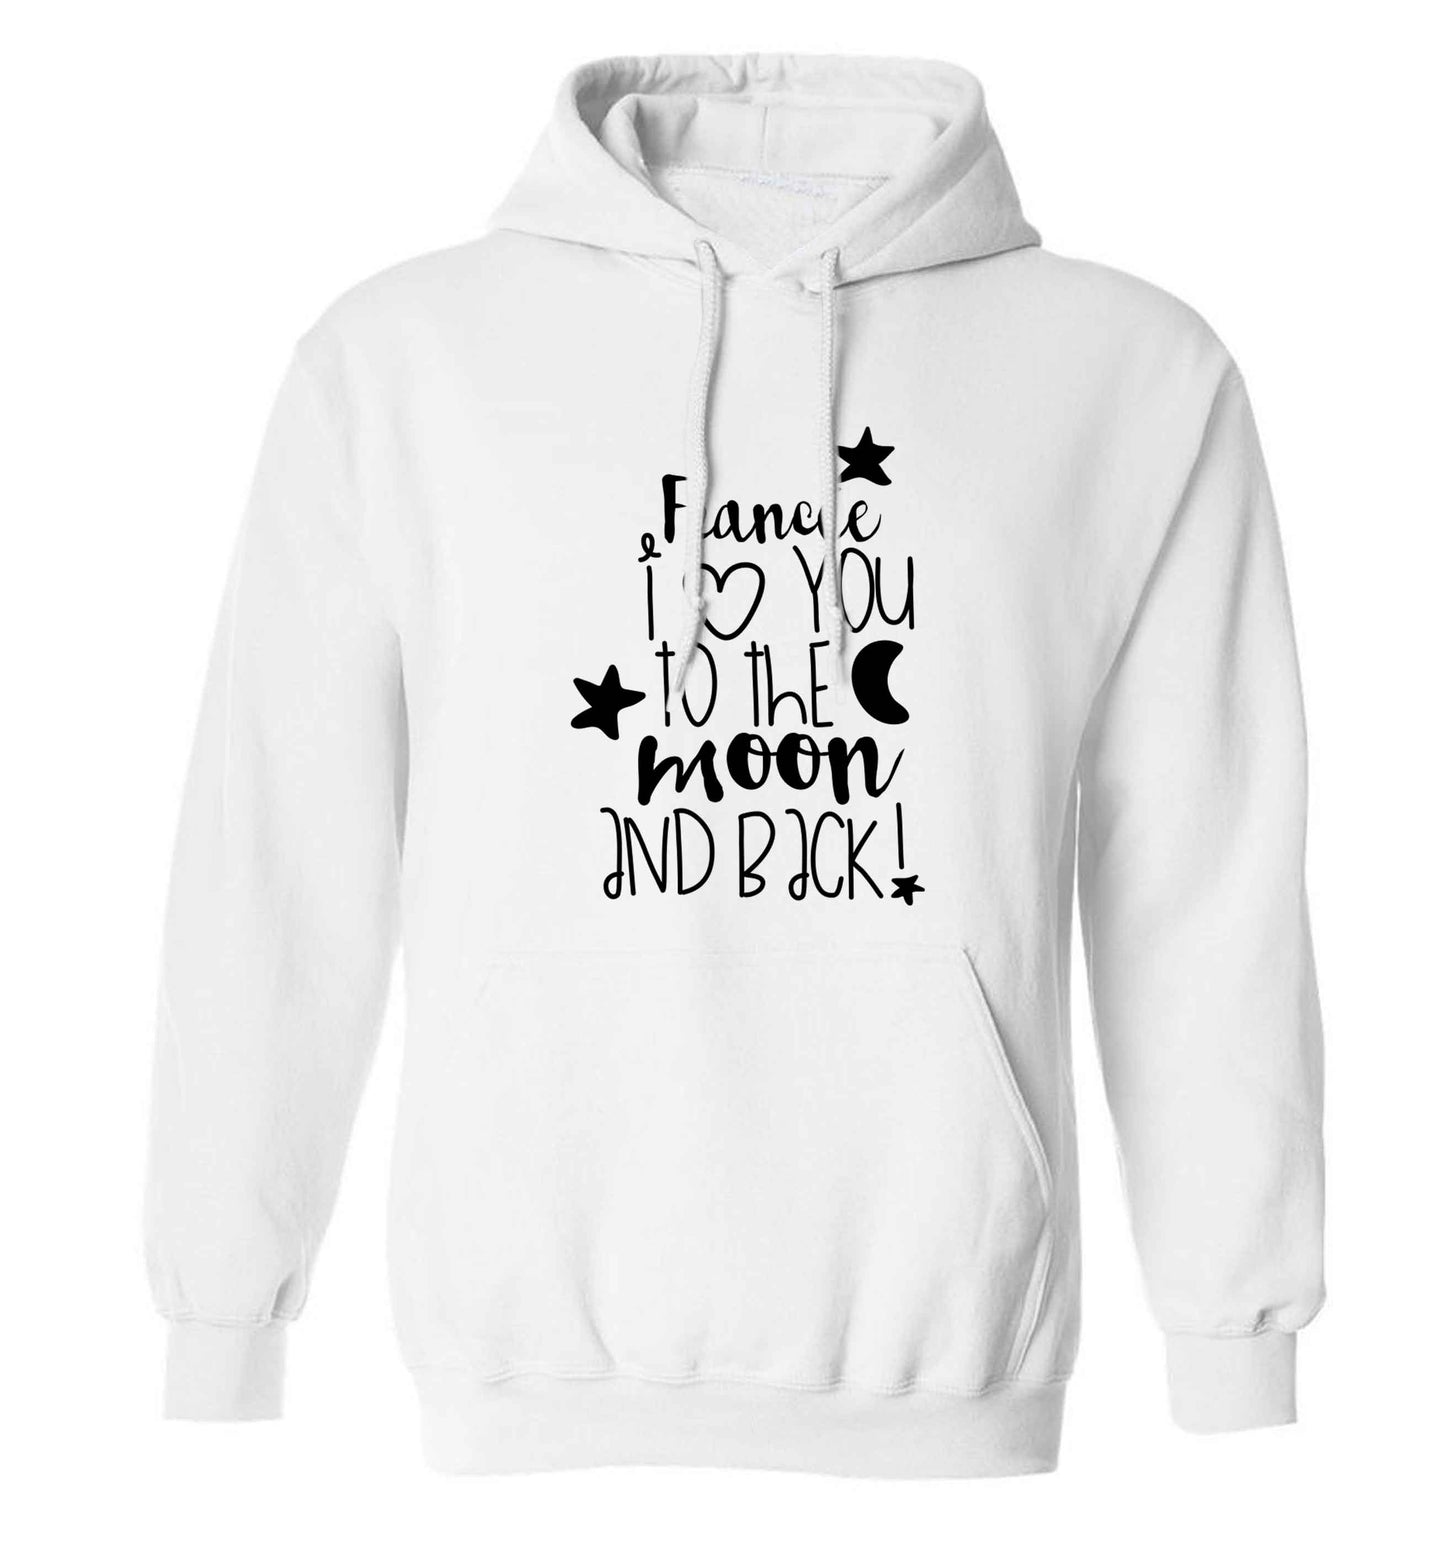 Fianc√©e I love you to the moon and back adults unisex white hoodie 2XL